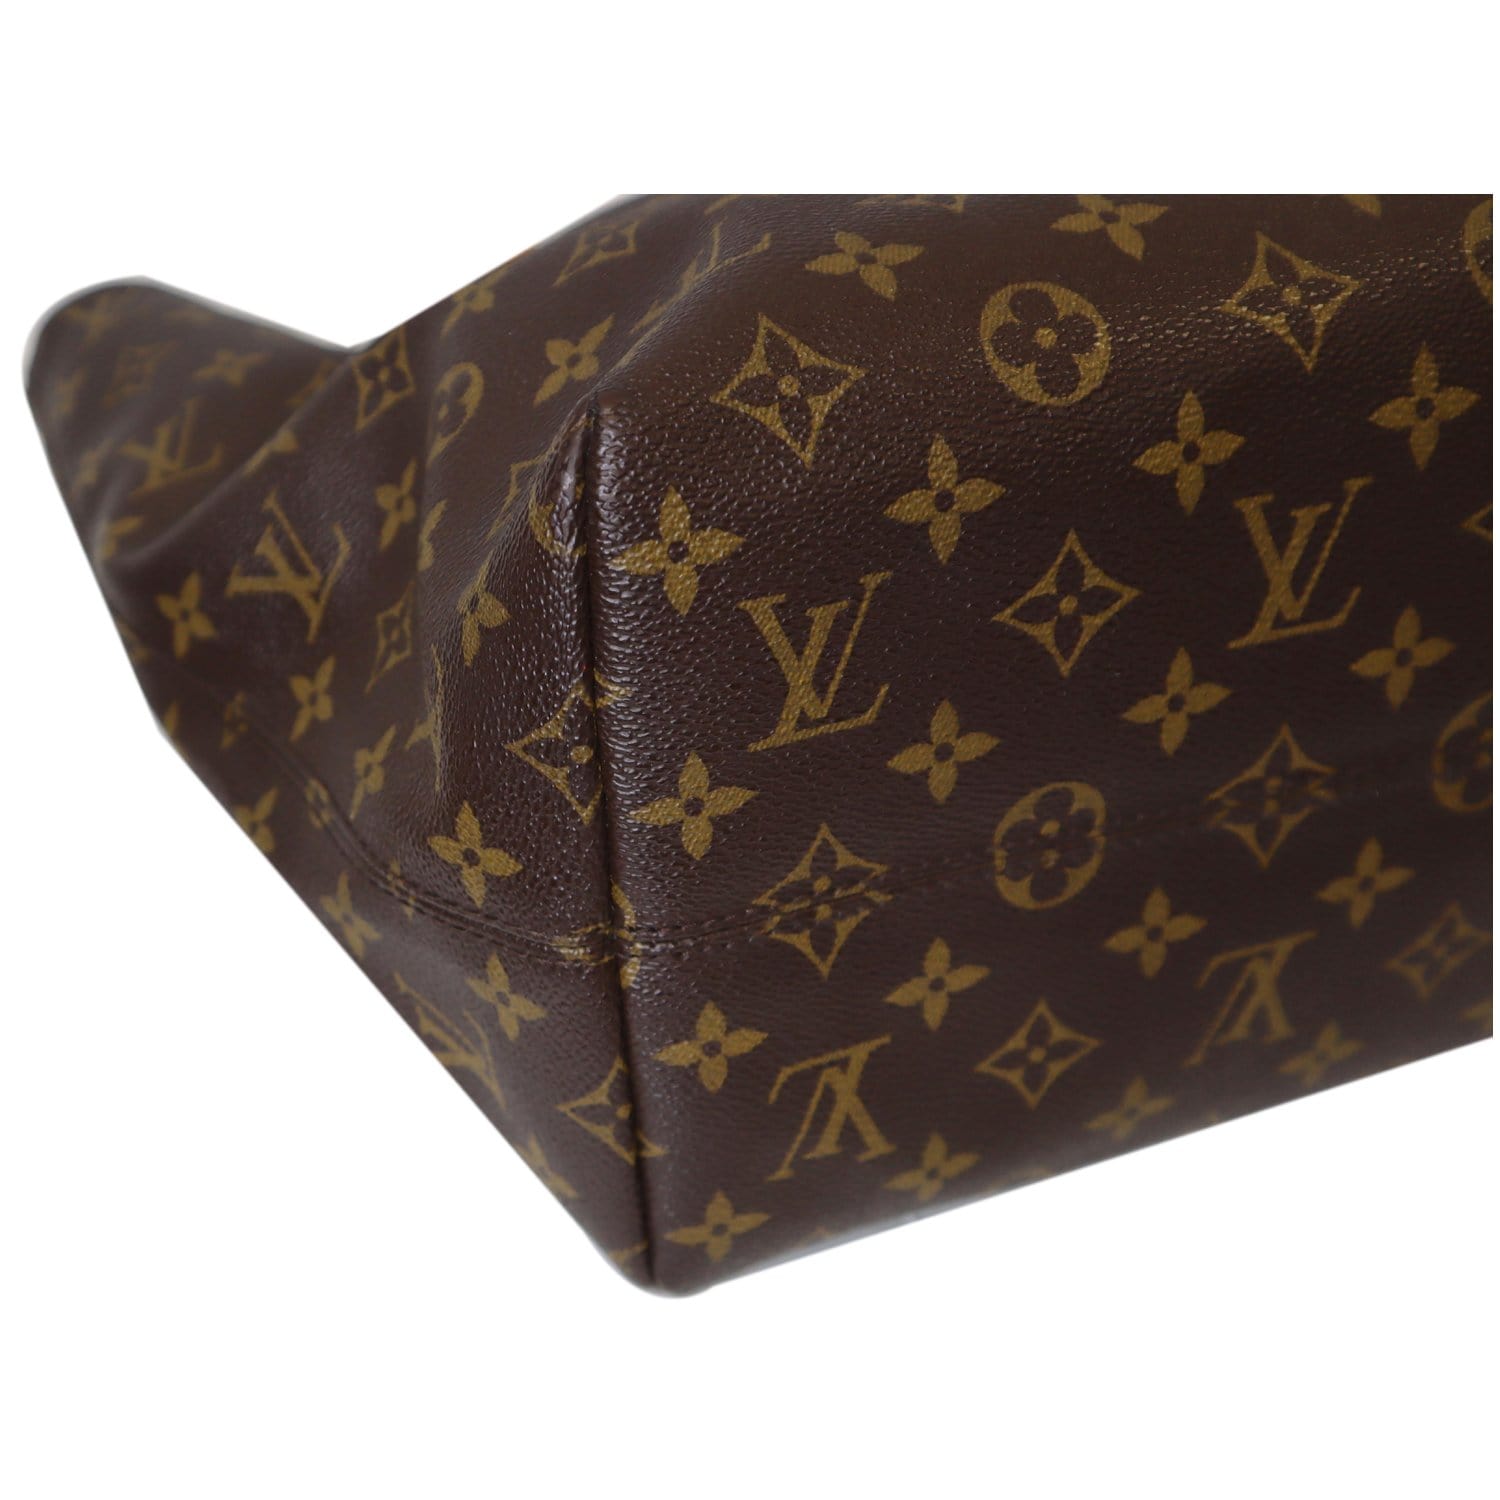 Louis Vuitton A4 Pouch Monogram Brown in Coated Canvas with Orange Black -  US